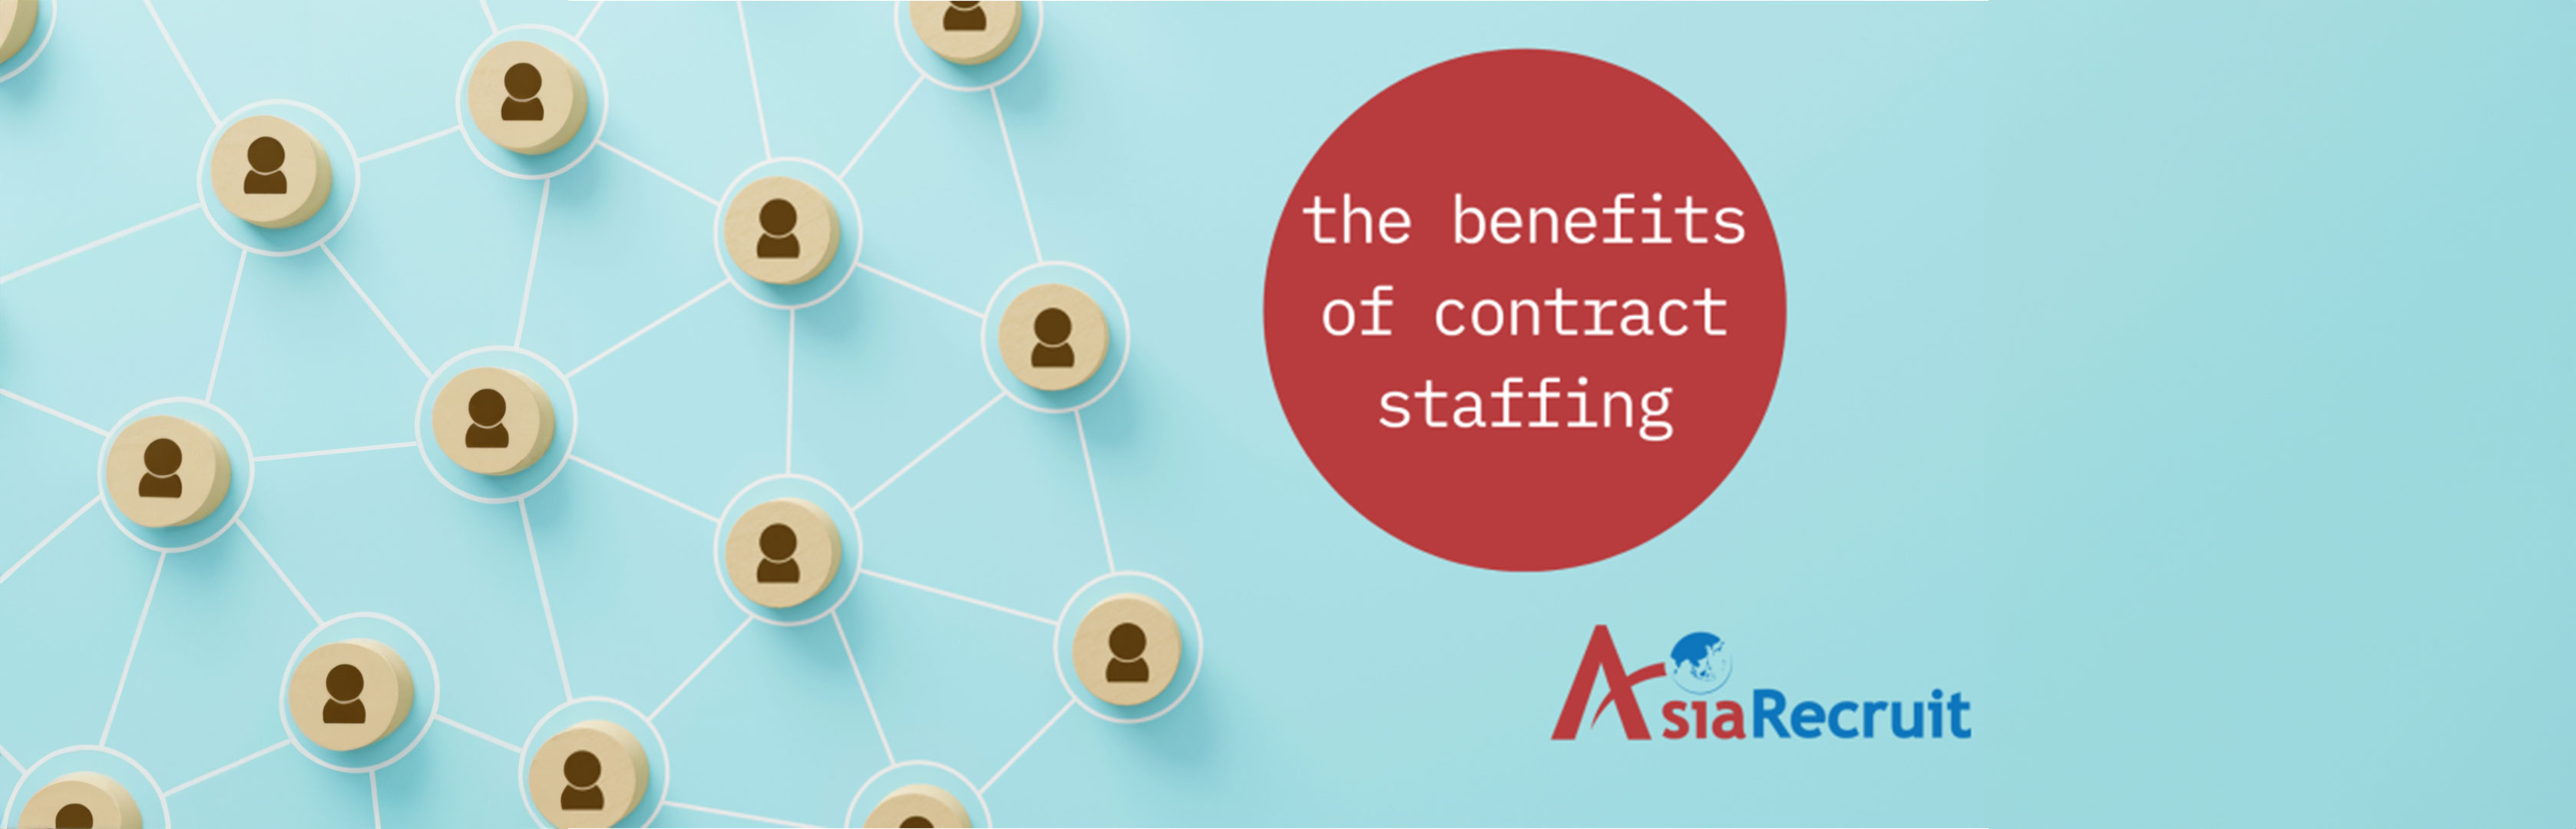 Contract Staffing: How employers and candidates benefit together